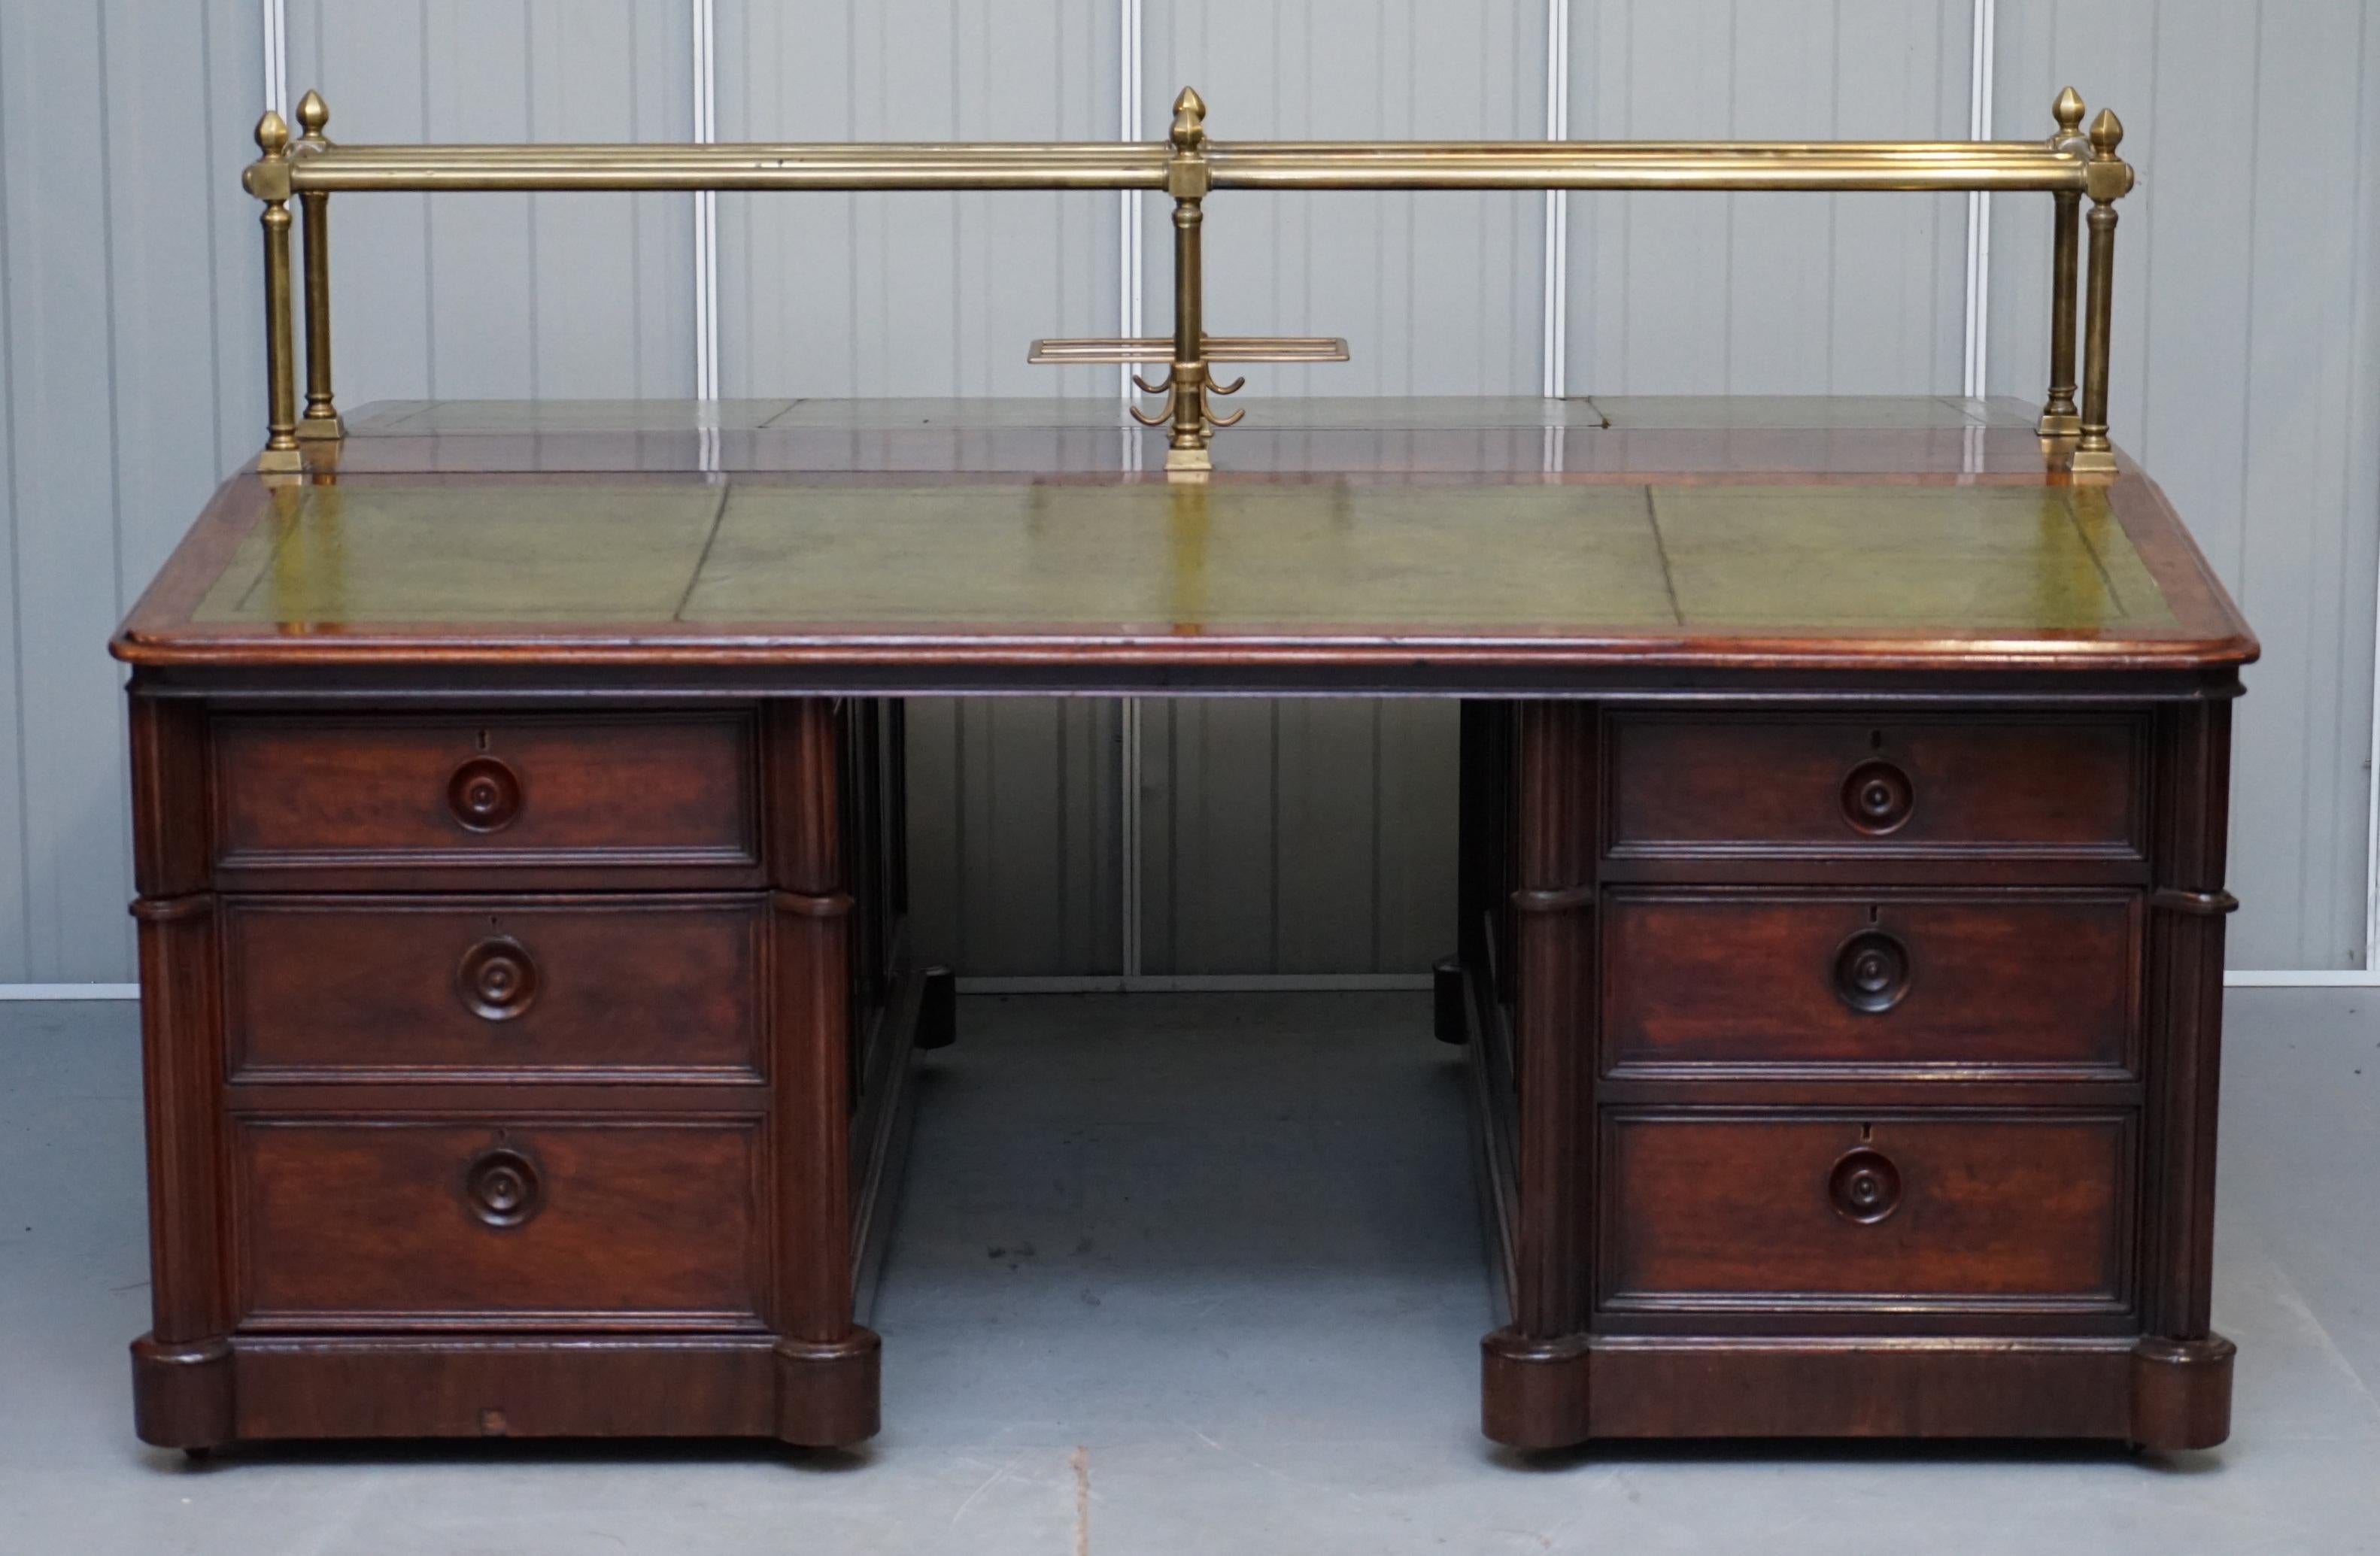 We are delighted to this absolutely sublime early Victorian Honduras mahogany with green leather top and brass reading rail twin pedestal bankers partners desk

What a desk! circa 1840, used in banks for accounting with space to lay out multiple